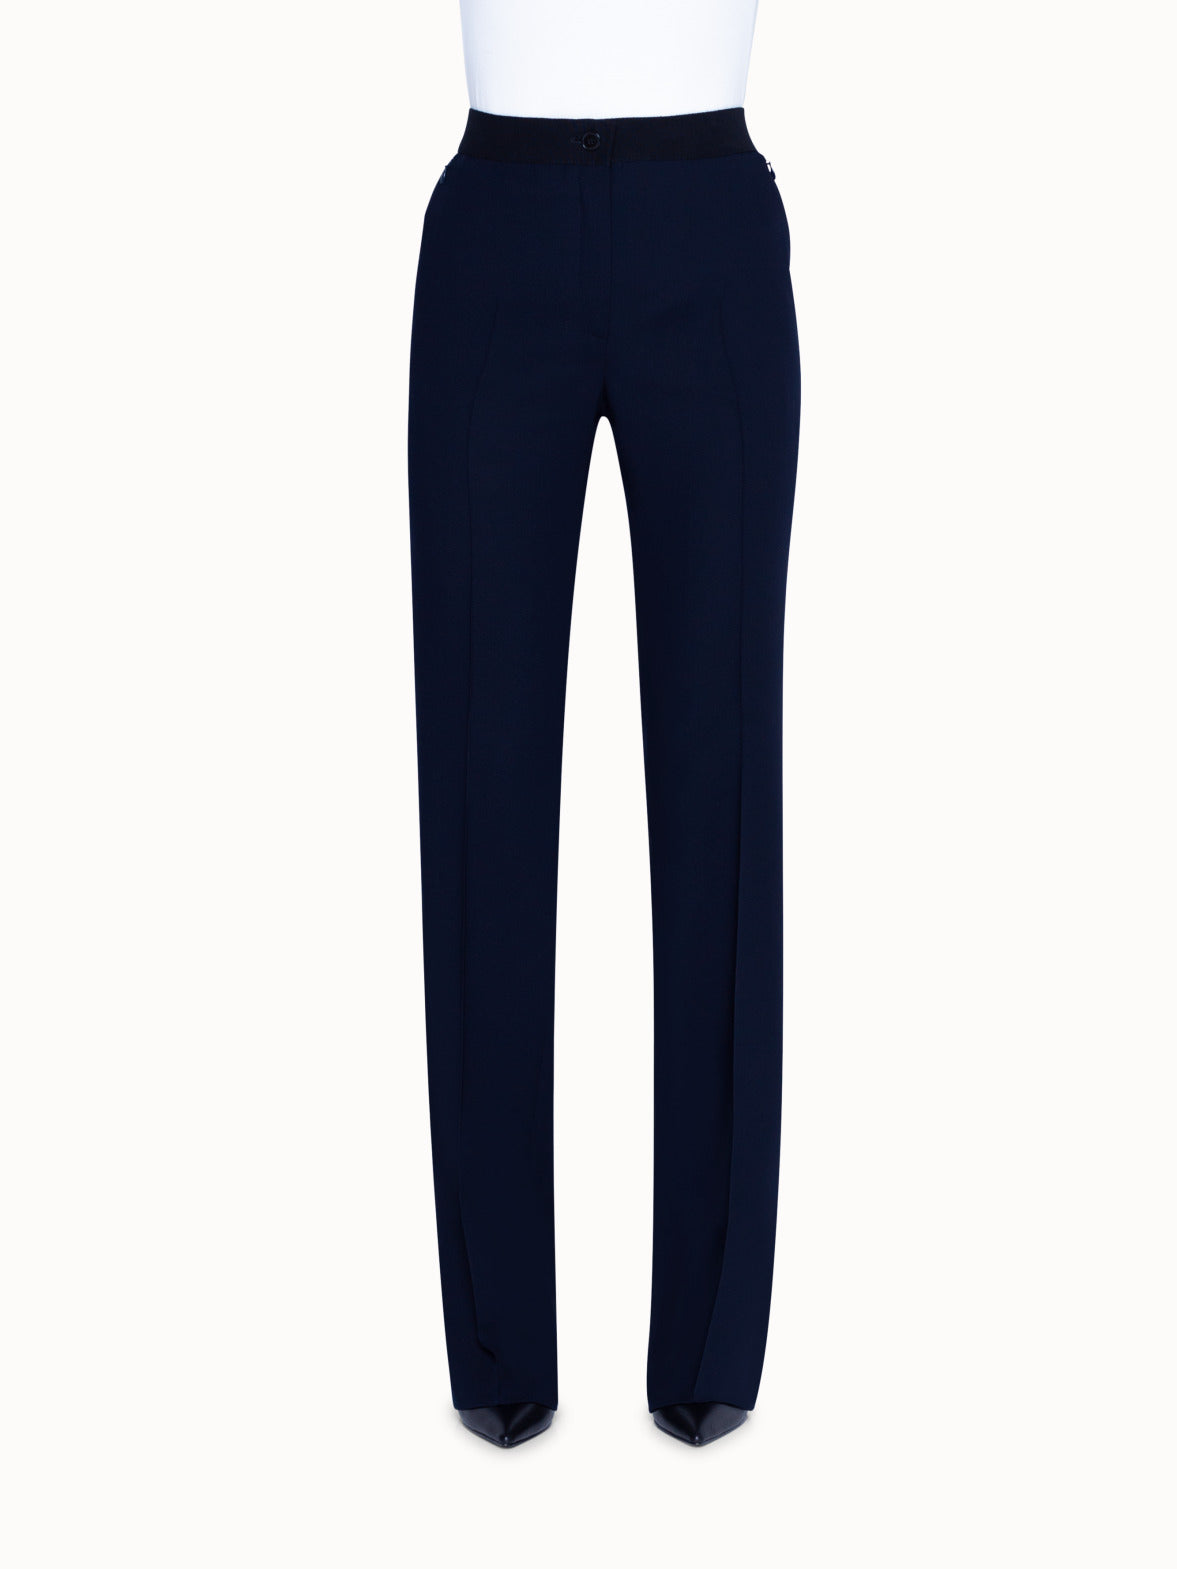 Buy Formal Stretchable Pant Navy Blue with Expandable Waist for